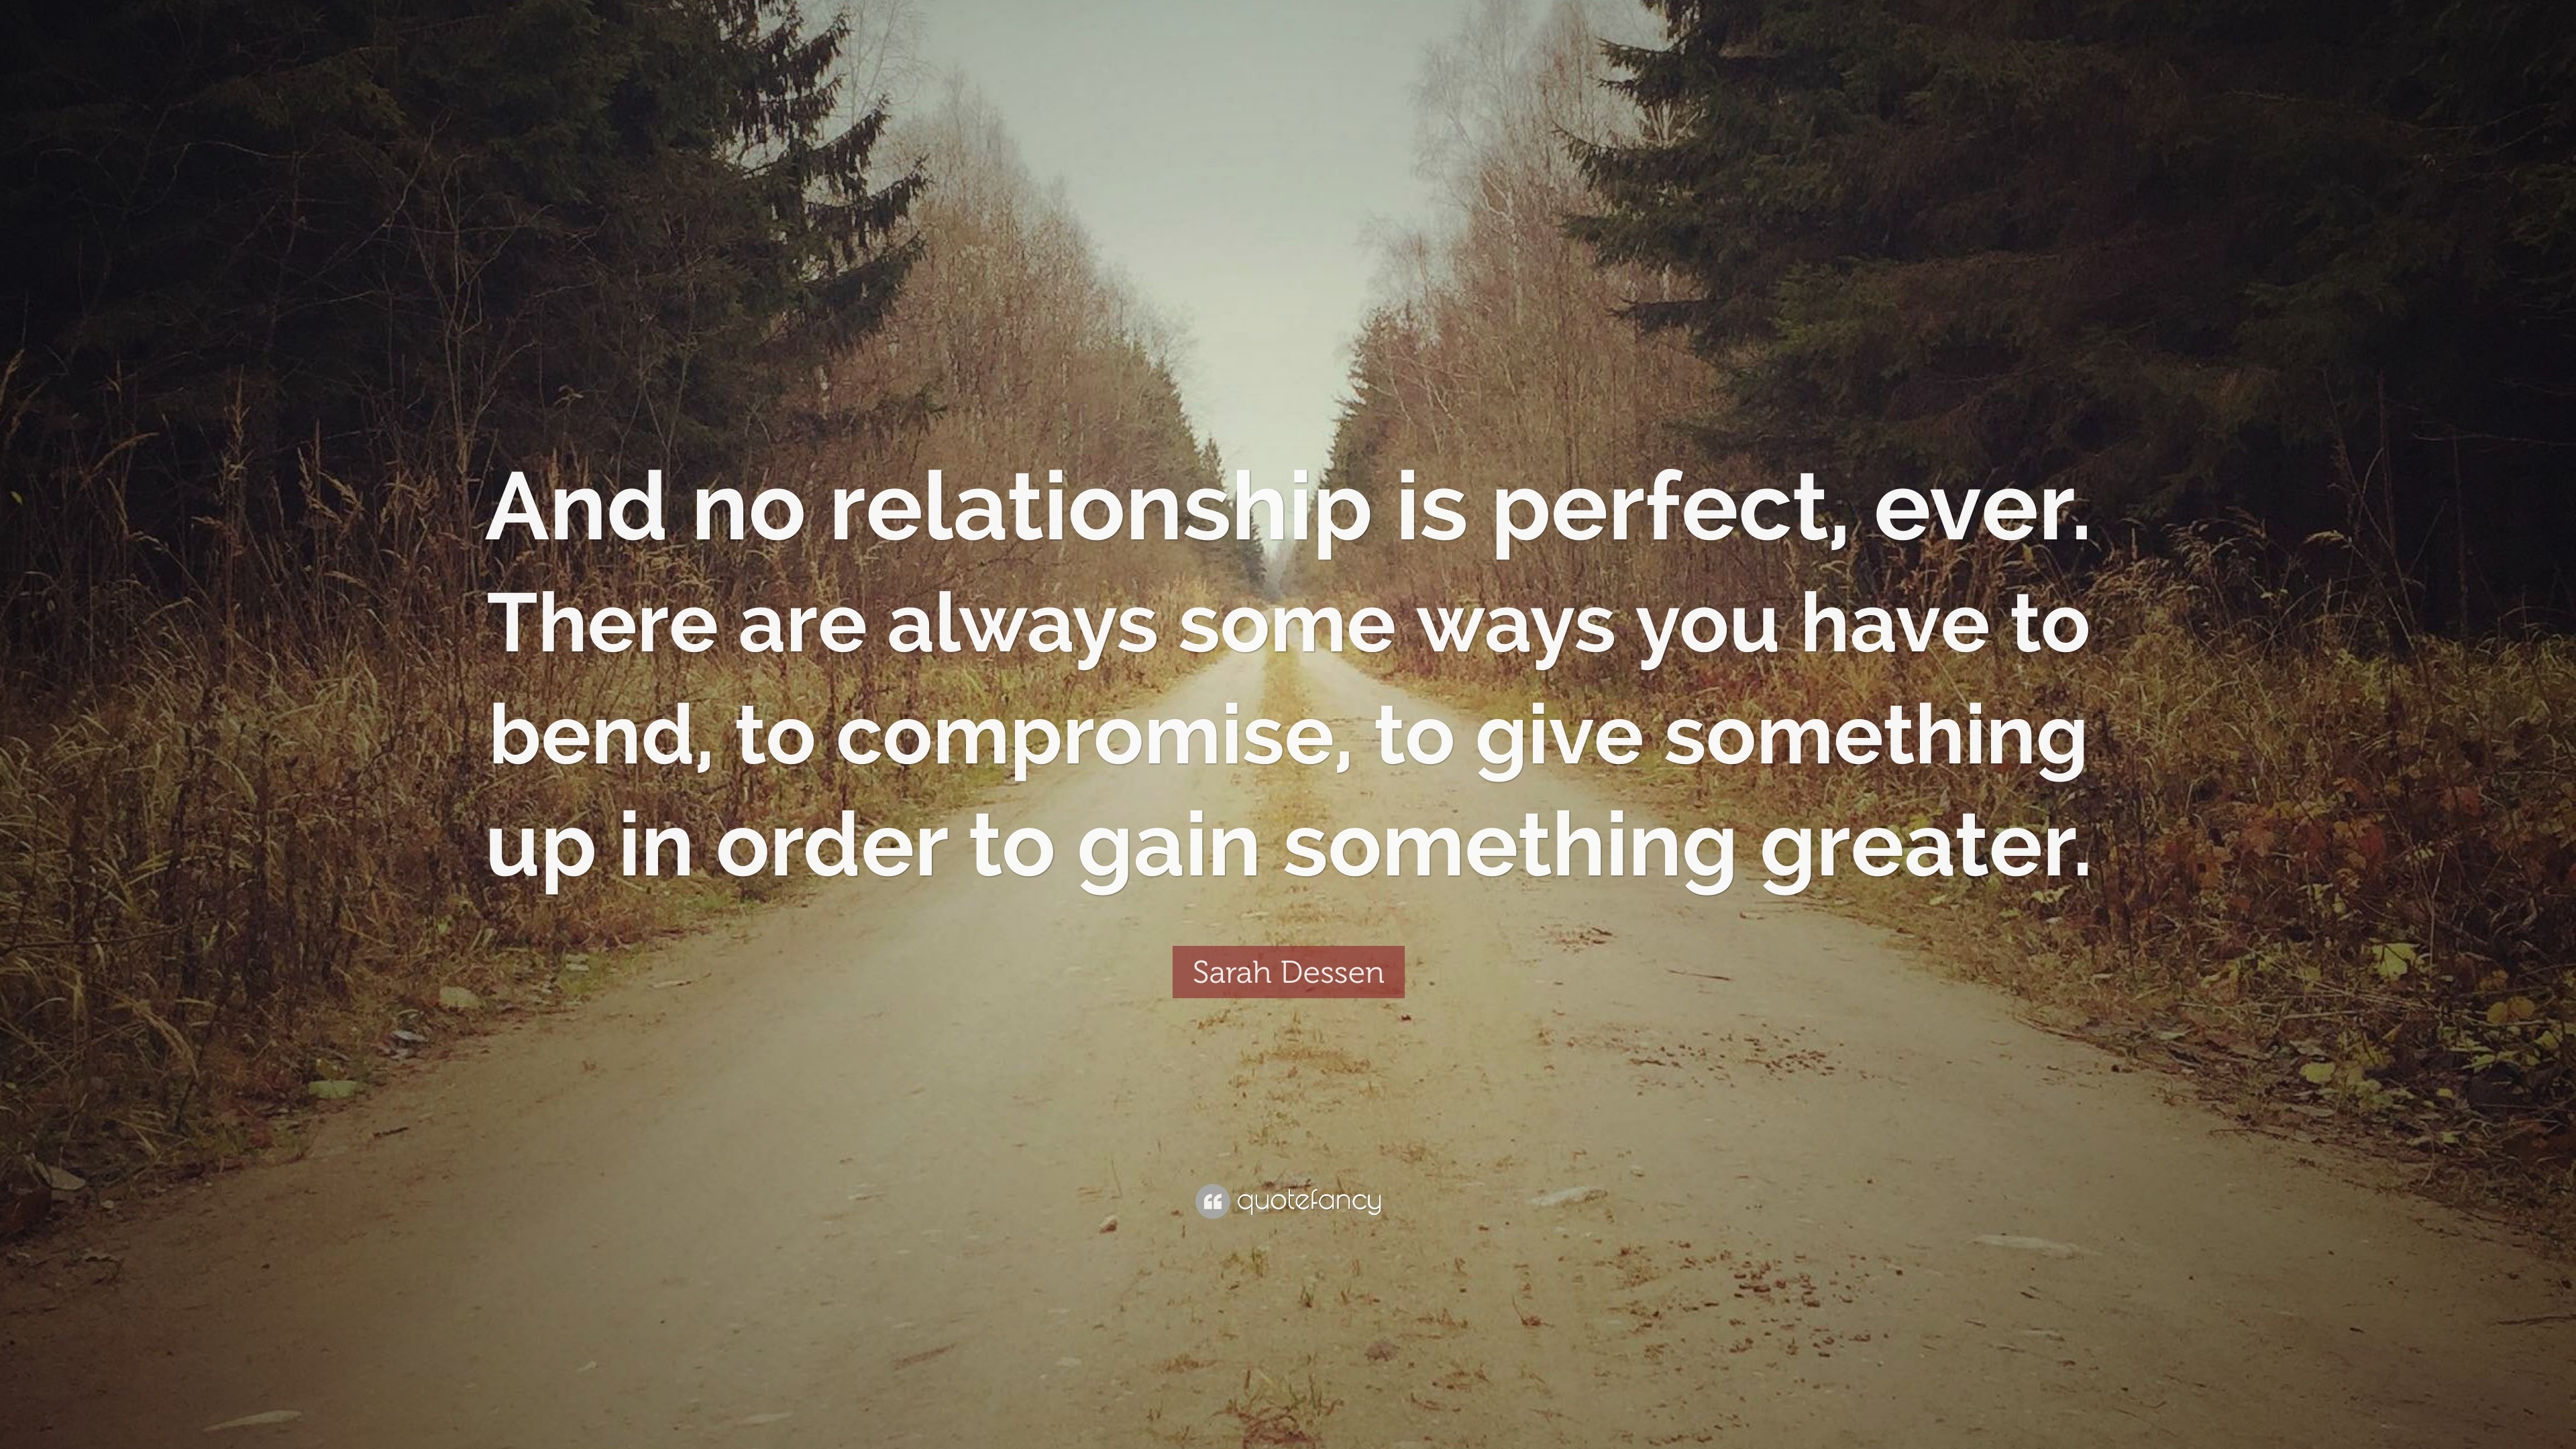 Sarah Dessen Quote: “And no relationship is perfect, ever. There are ...